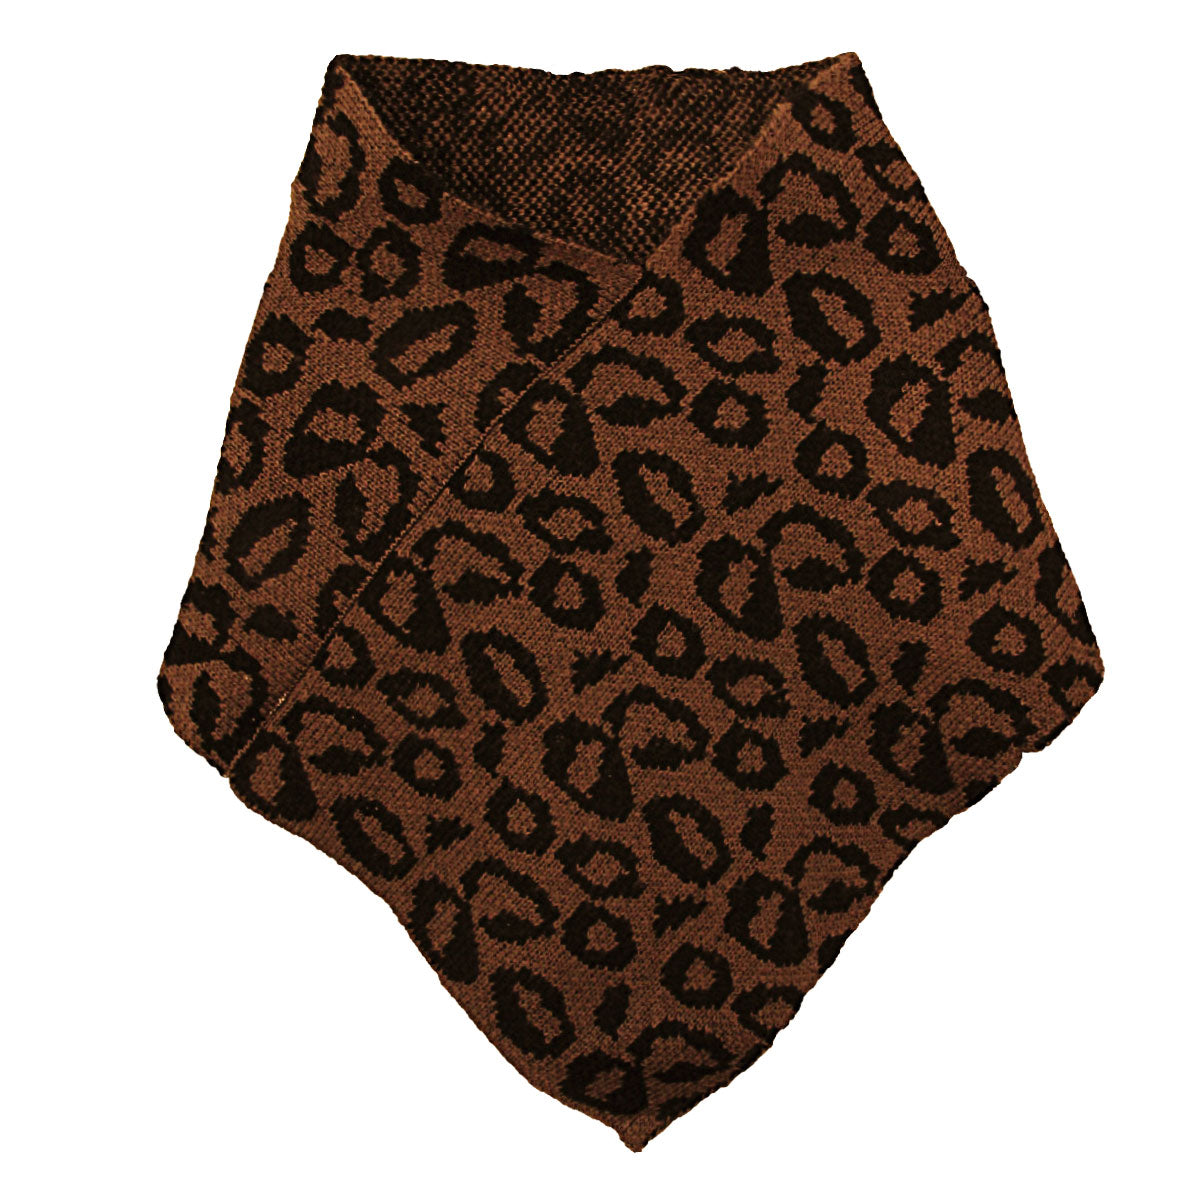 Brown Leopard Triangle Tube Scarf